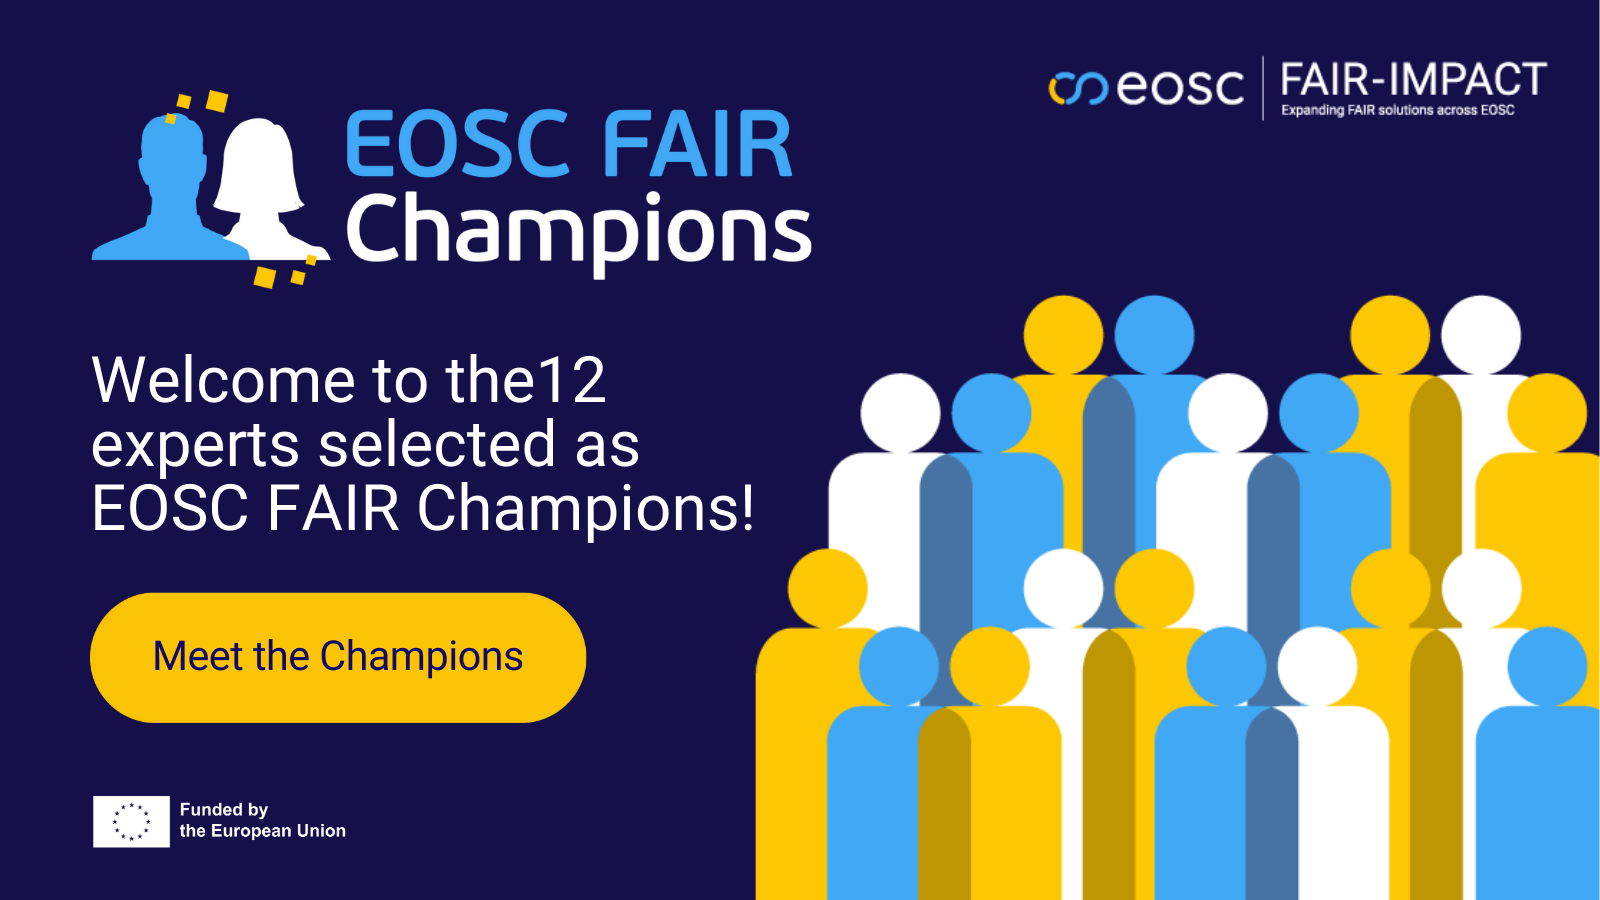 Welcome to the EOSC FAIR Champions!